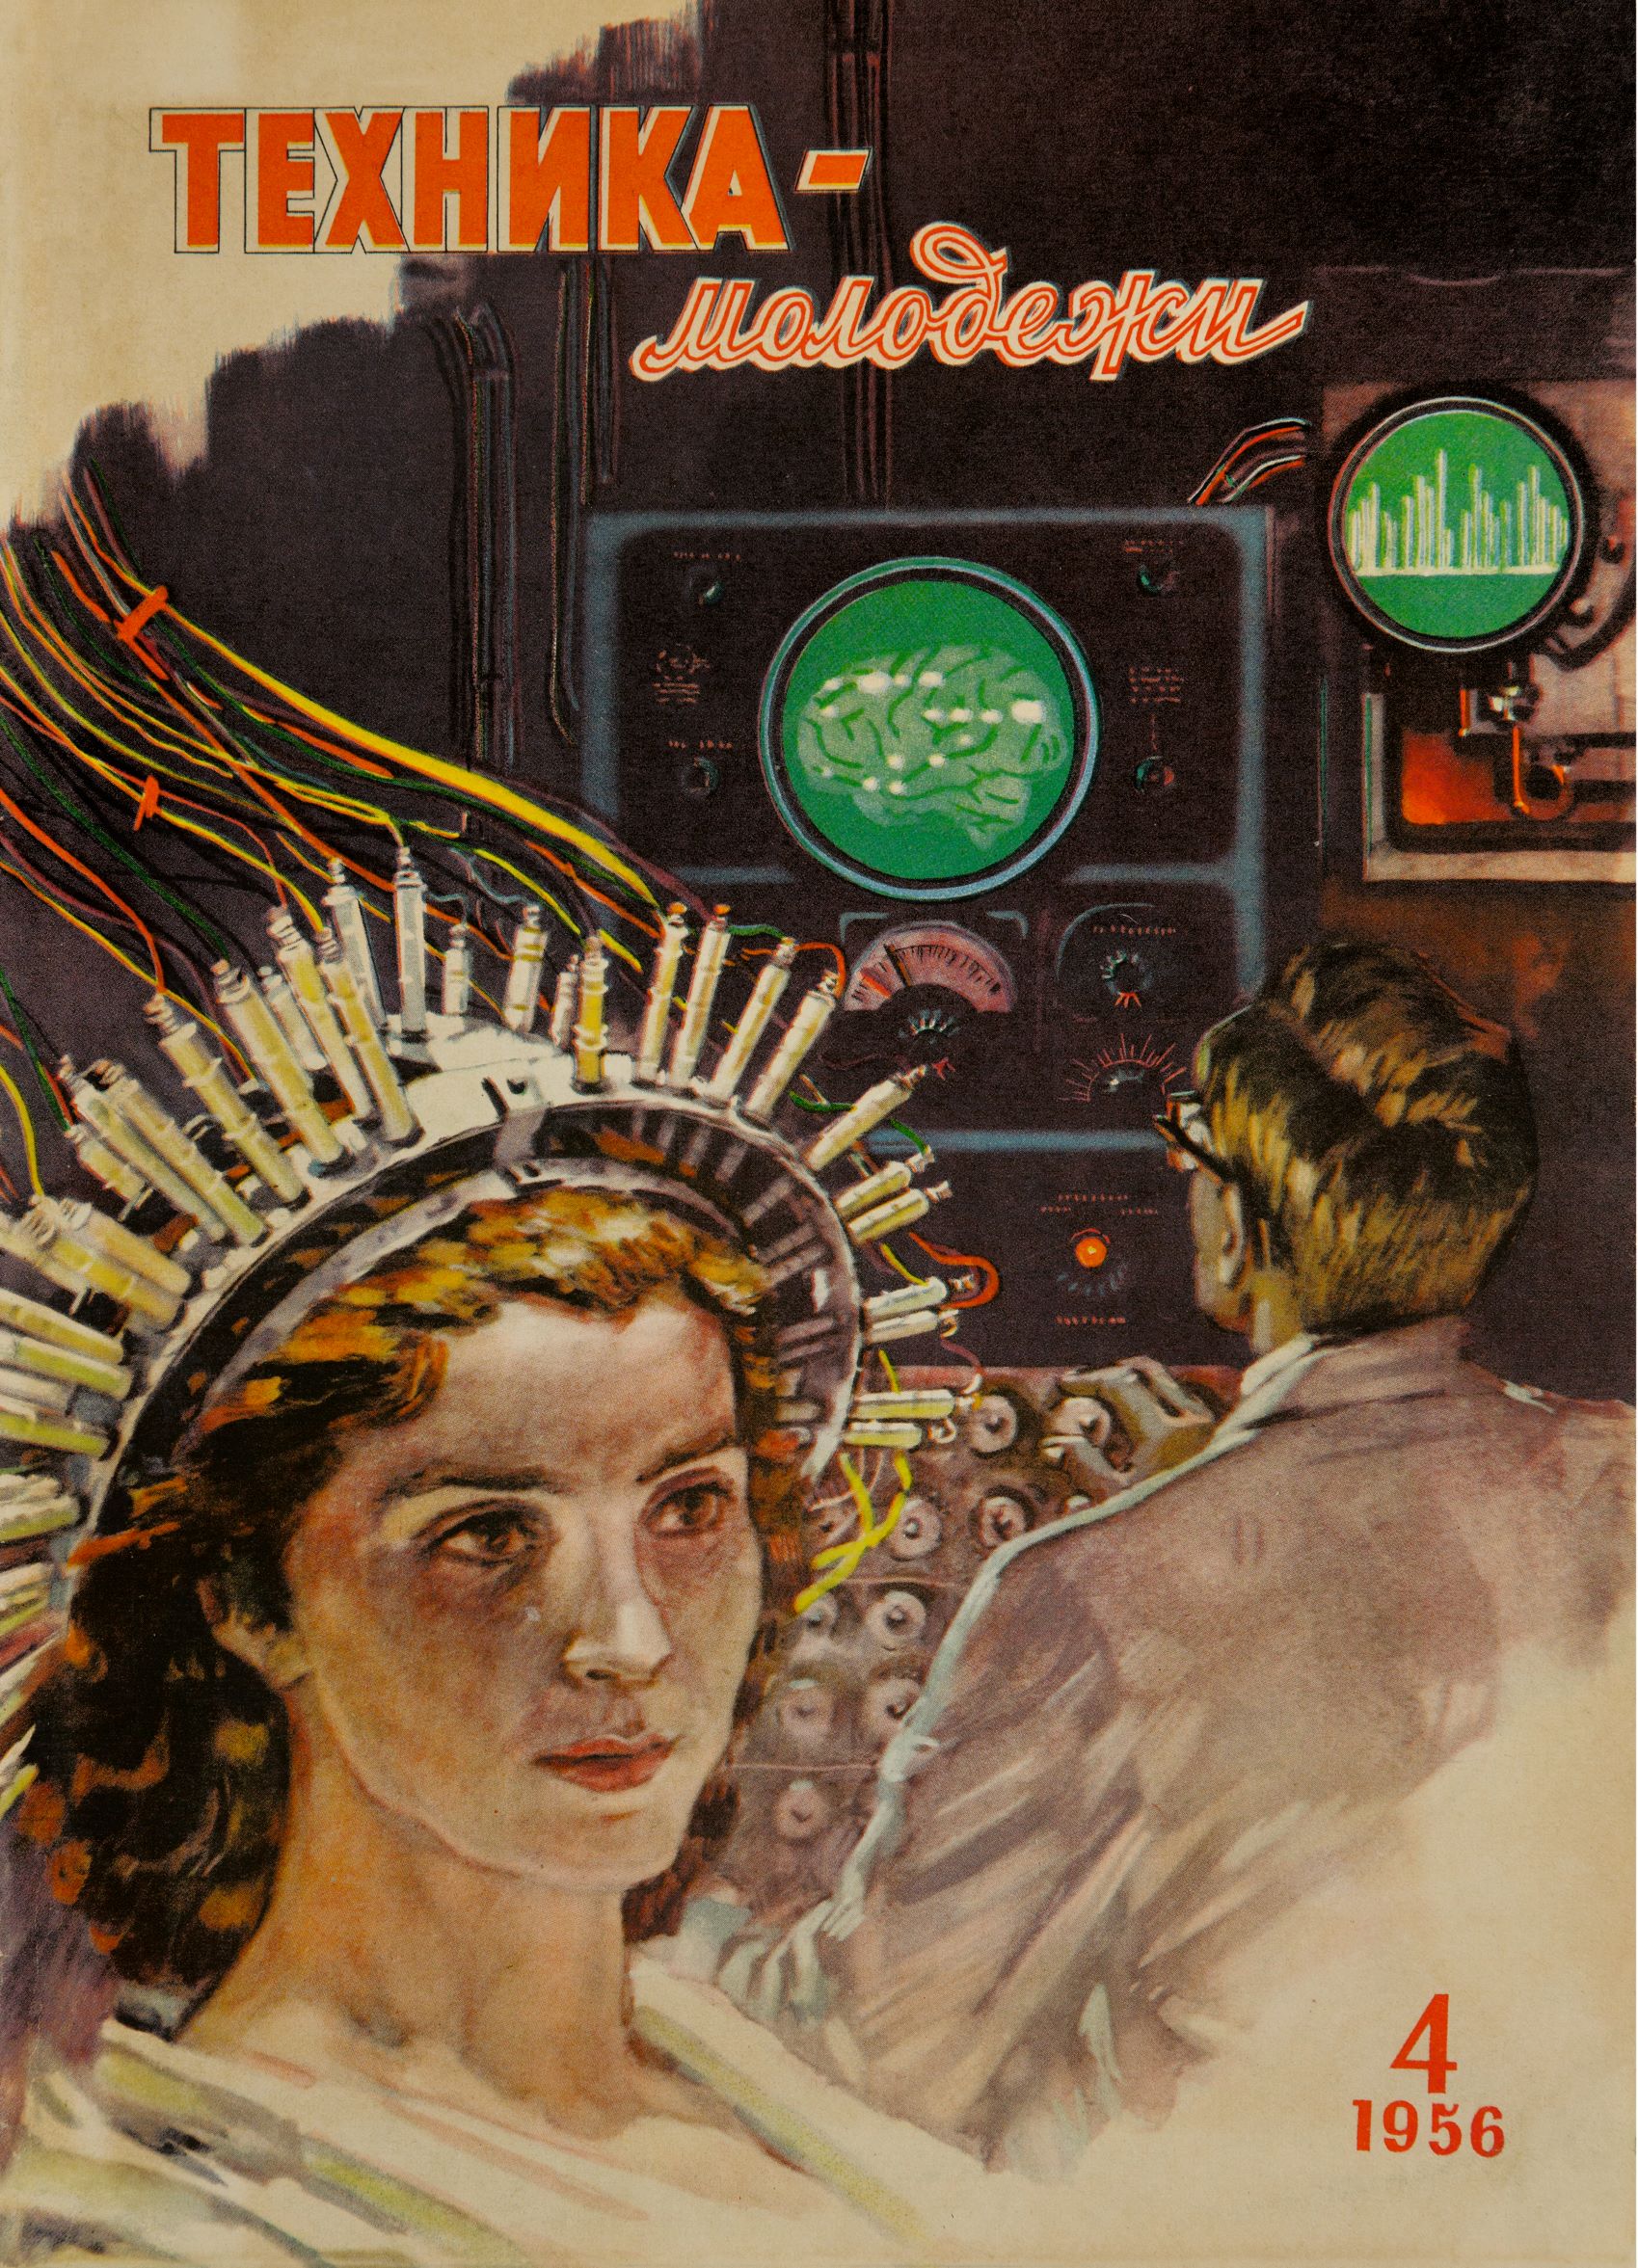 Technology for the Youth, issue 4, 1956, illustration by A. Pobedinsky for the article ‘Brain Emits Stars on the Oscilloscope Screen’, which speculates on the existence of telepathy, and whether the human brain emits  elecromagnetic waves and signals